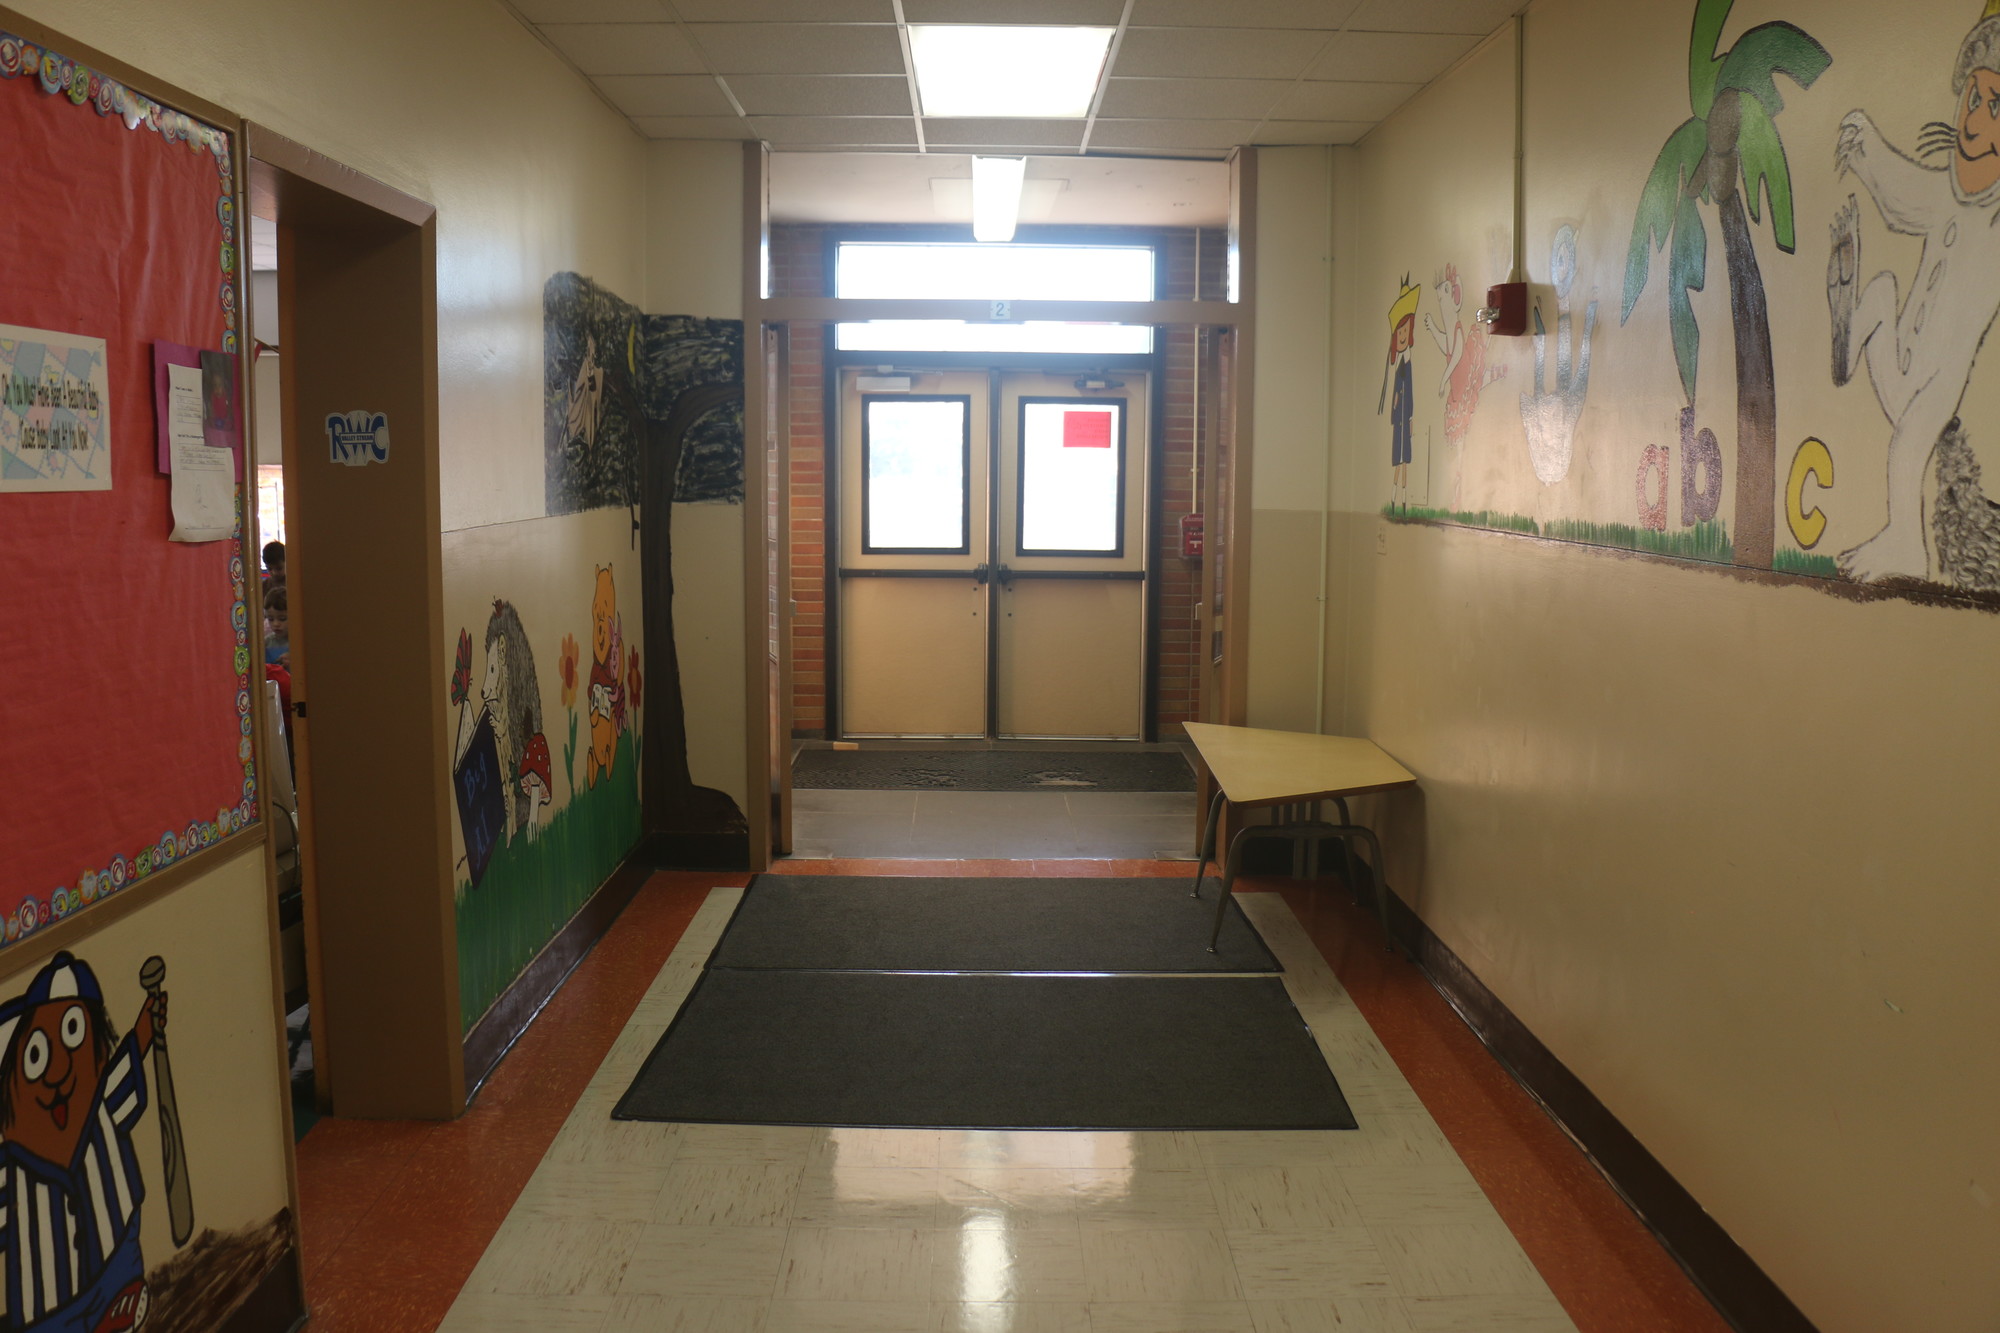 A similar fire exit at the Robert W. Carbonaro School has been converted into an English as a New Language classroom.